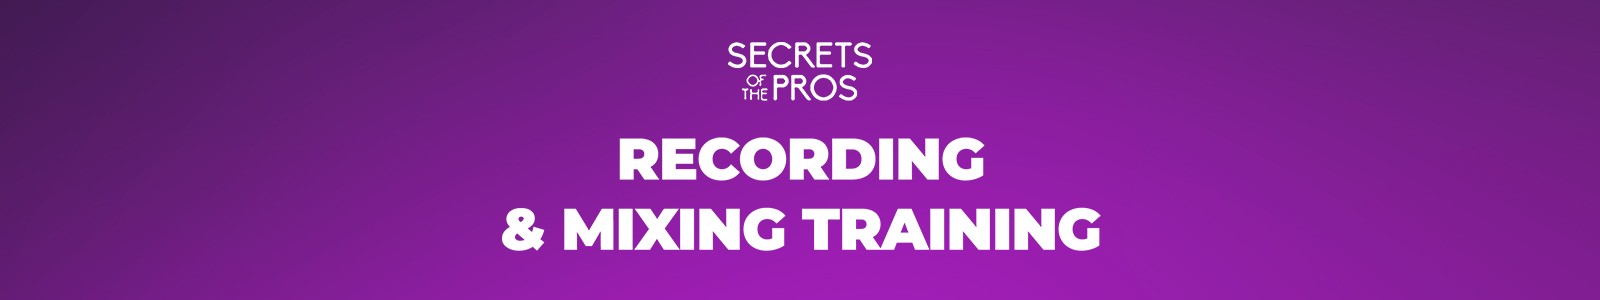 Secrets of the Pros Recording & Mixing Training (3-month Subscription)